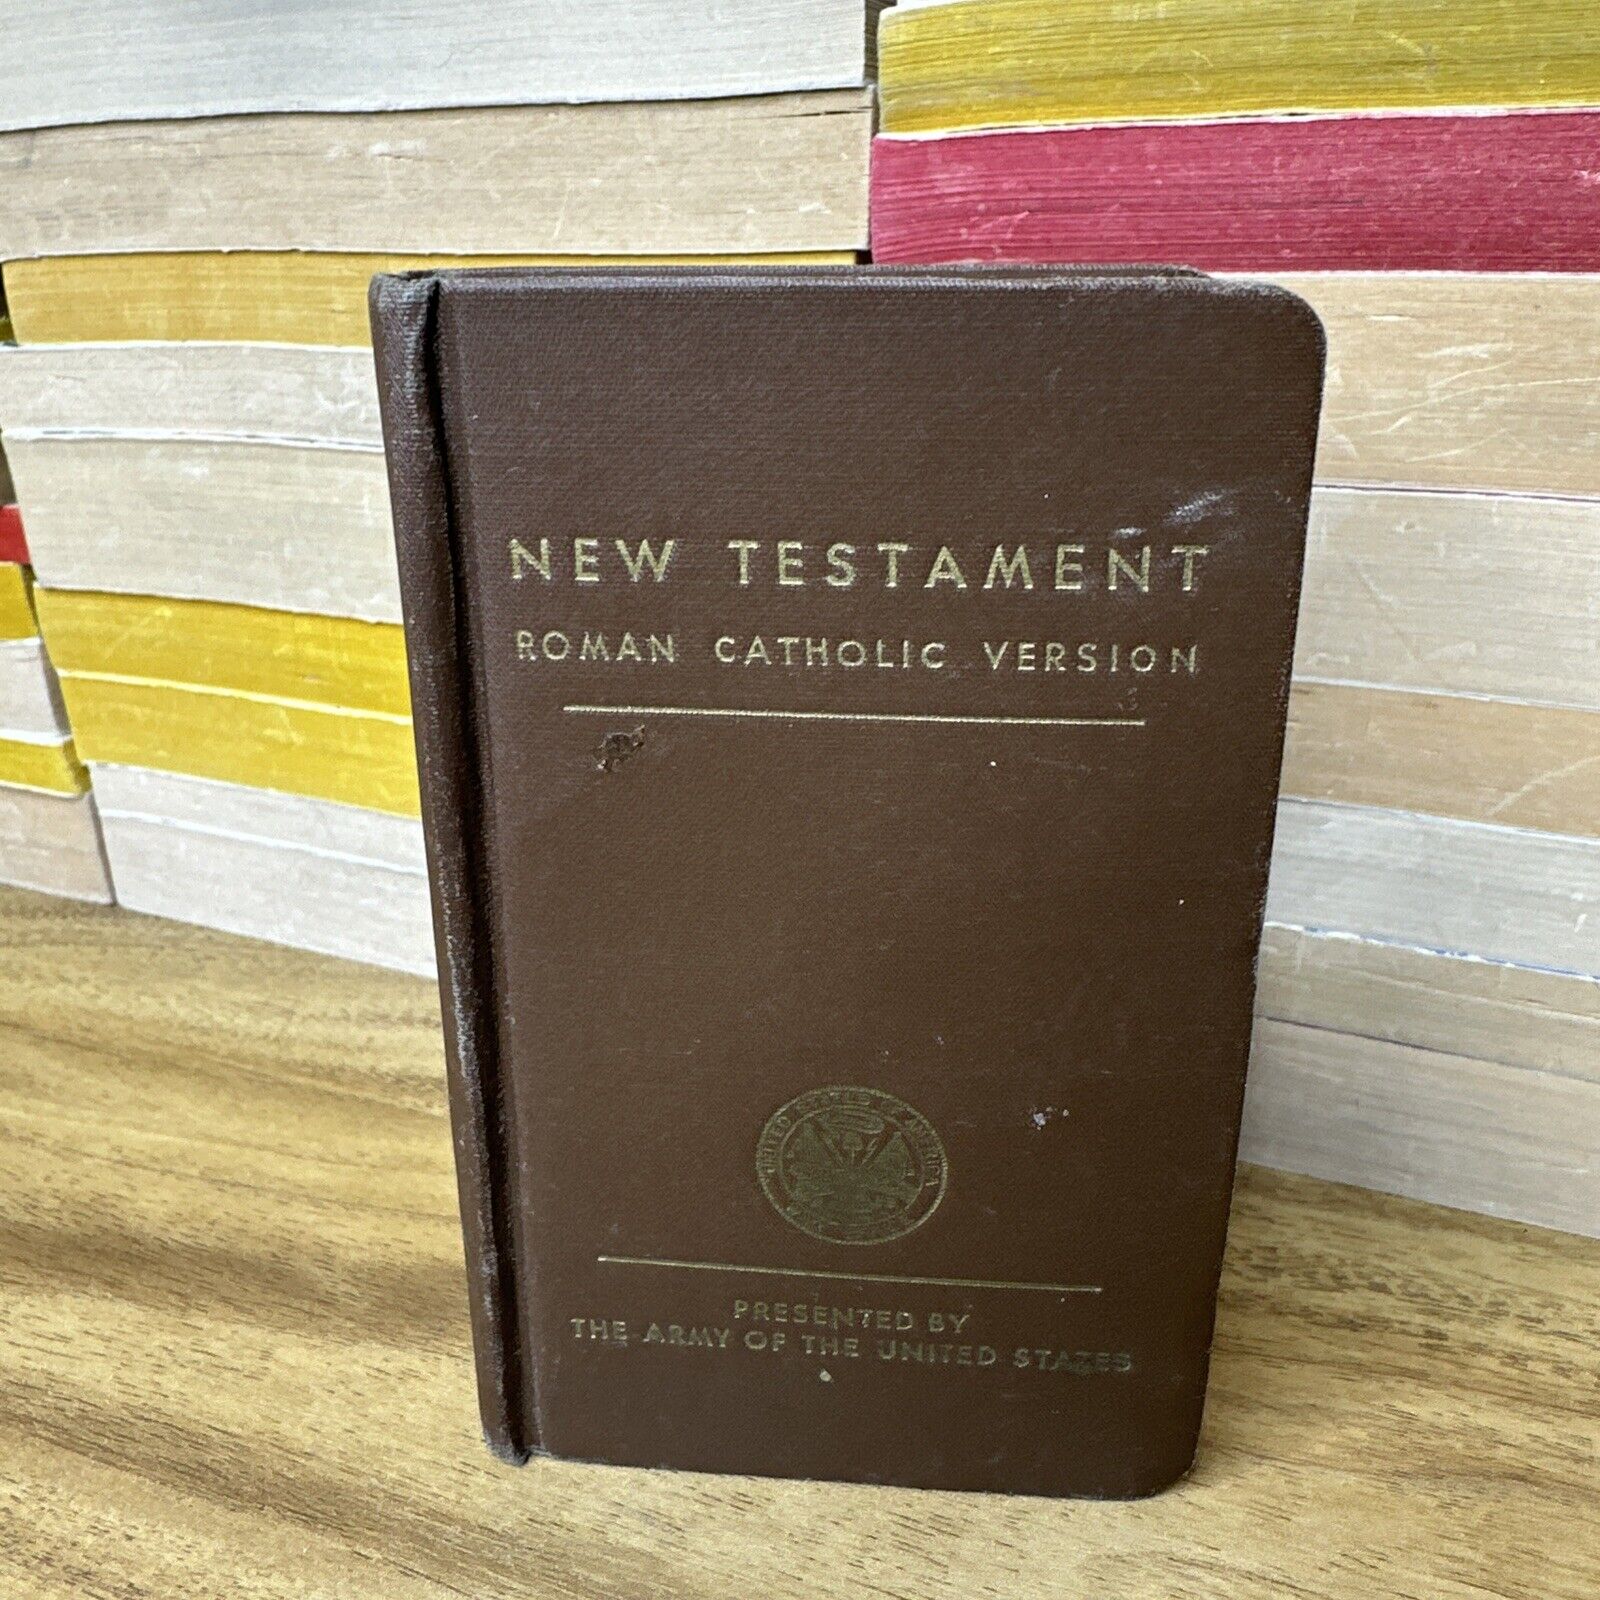 1943 WWII New Testament Bible  Roman Catholic Version  Presented by US Army